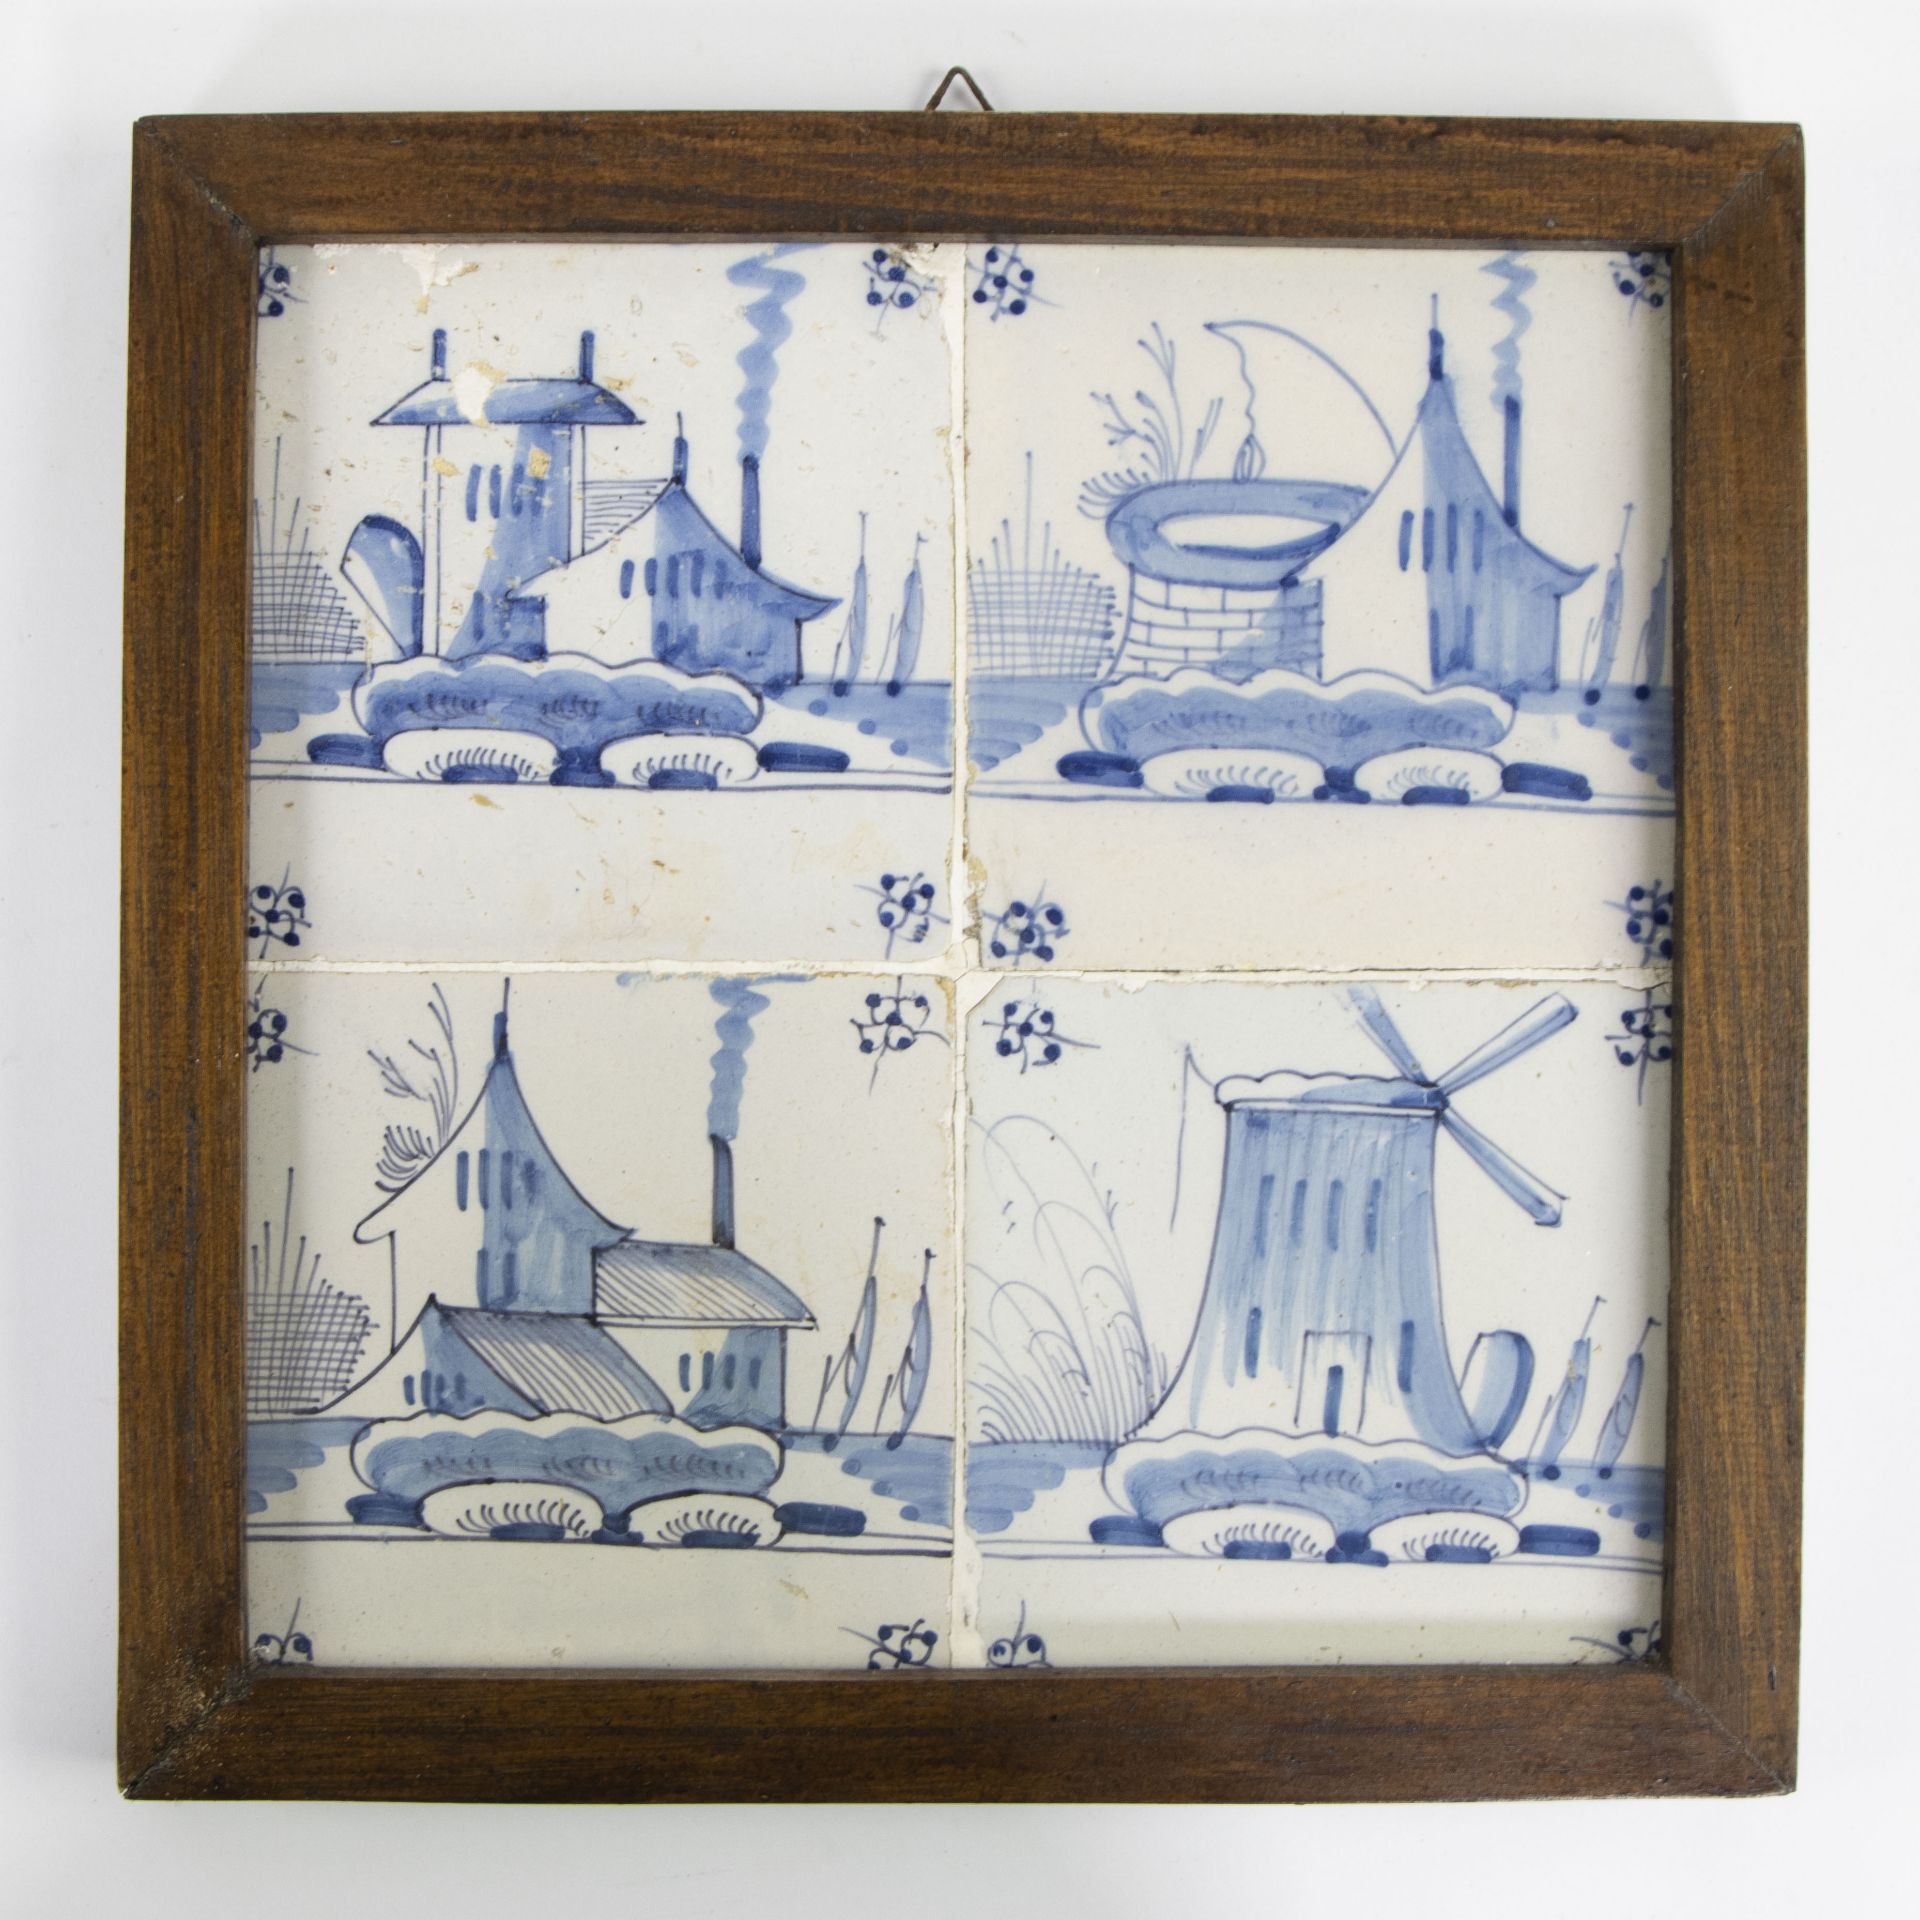 Lot of Delft blue and white tiles, 18/19th C. - Image 2 of 3